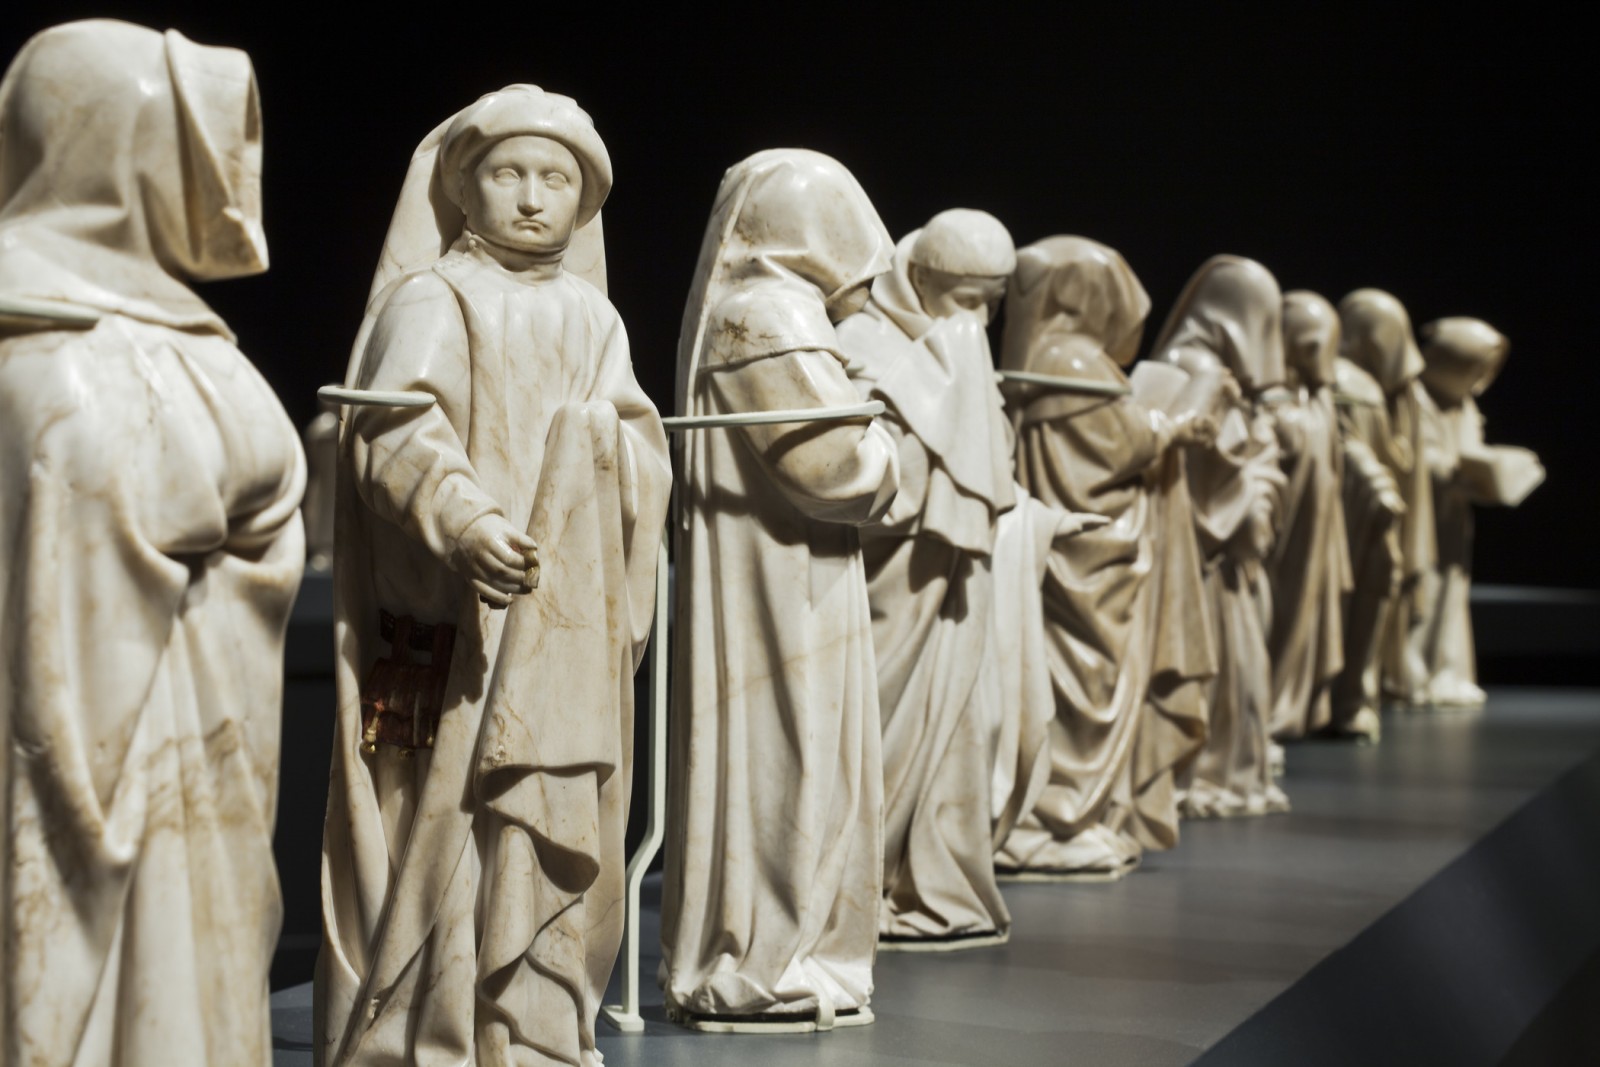 Image: The Mourners: Tomb Sculptures from the Court of Burgundy